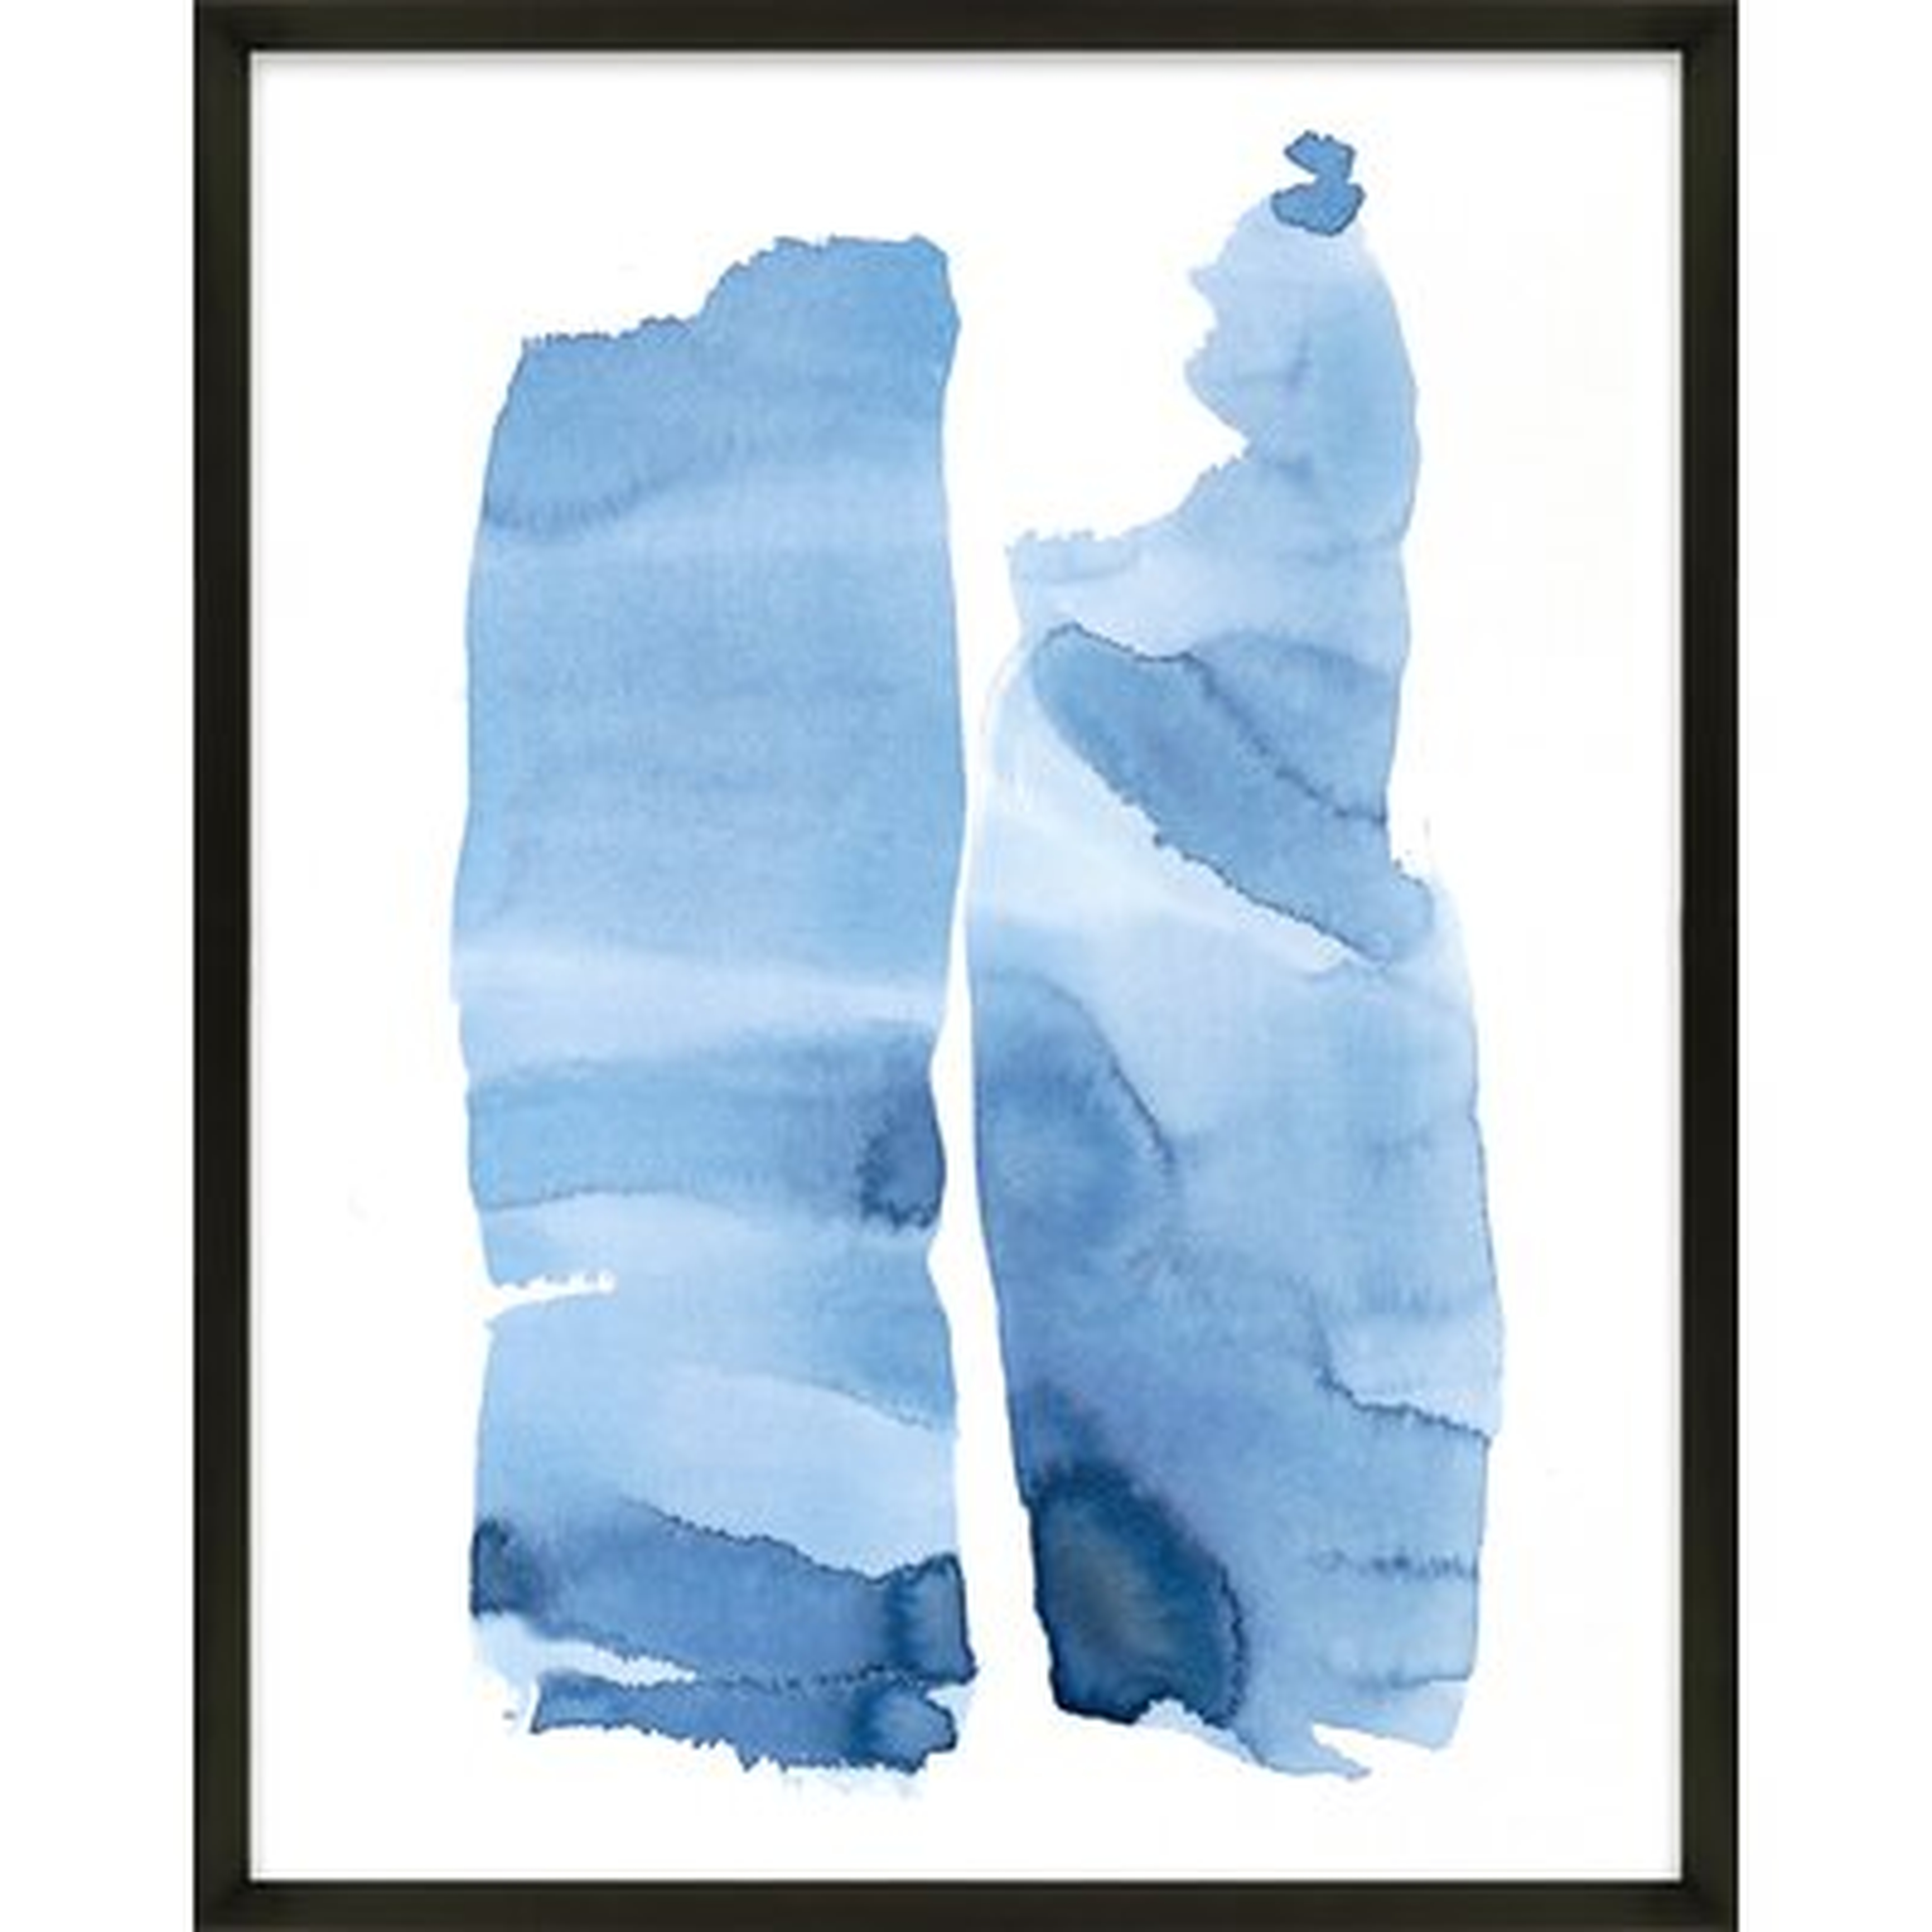 Blue Wash Series Blue Wash 2 by Jacques Pilon - Picture Frame Painting Print on Paper - AllModern